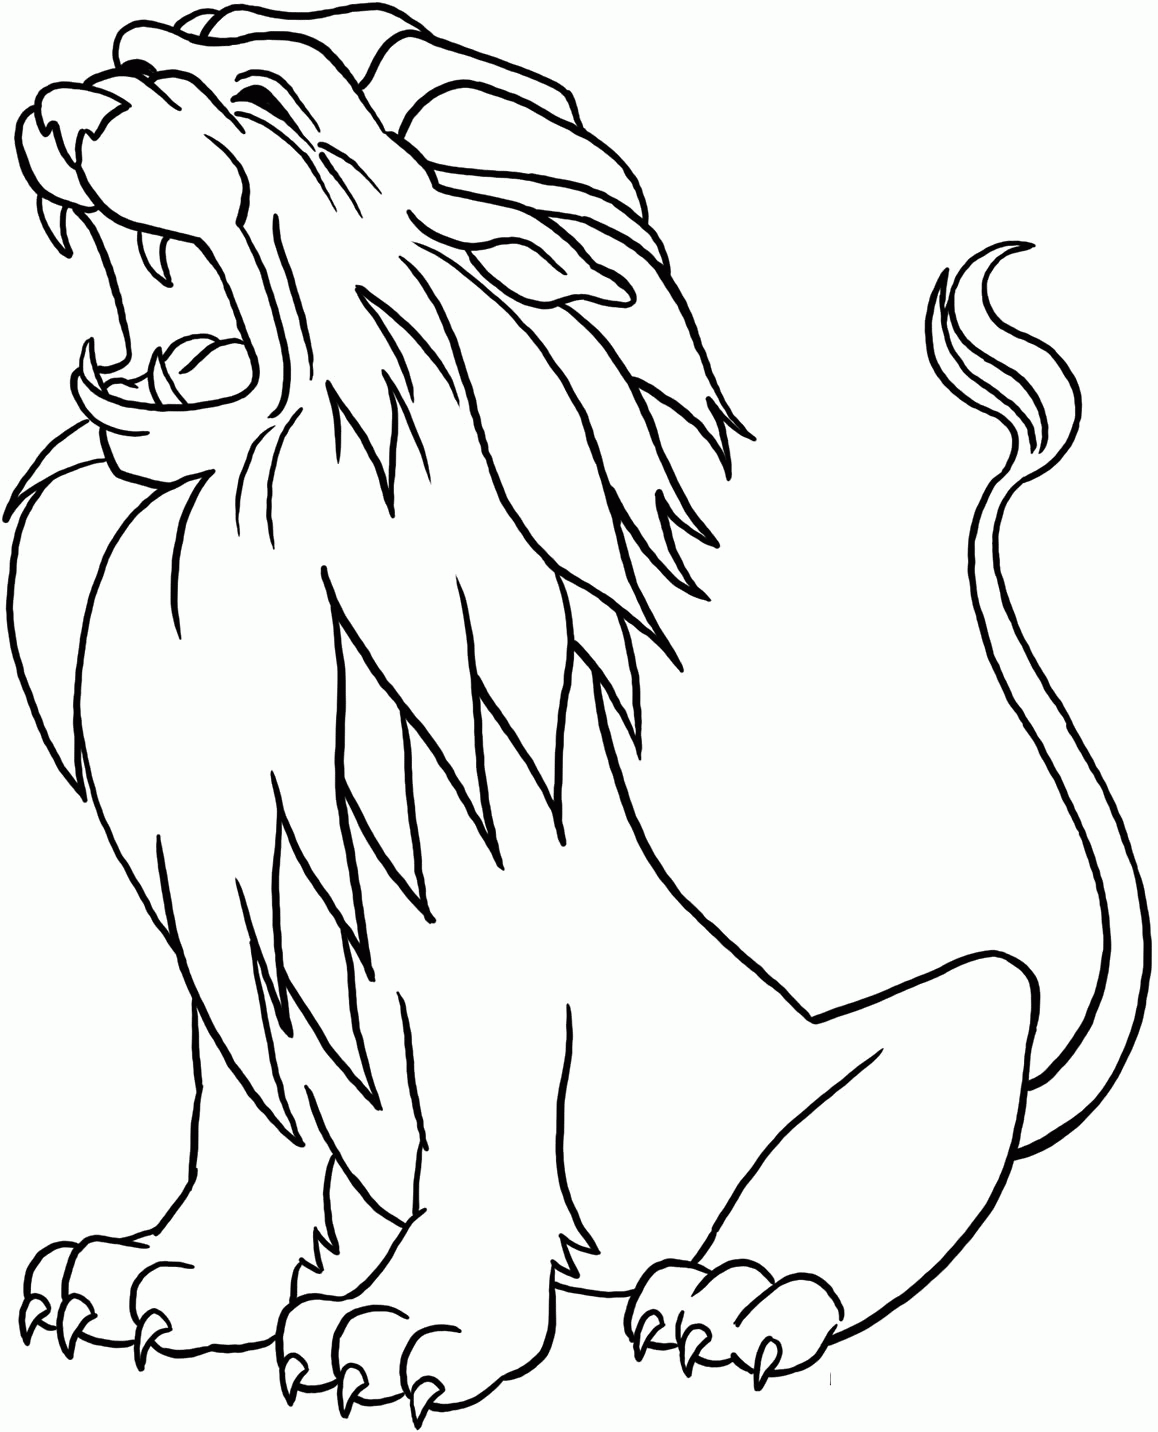 Code Breaker Coloring Pages - Coloring Pages For All Ages